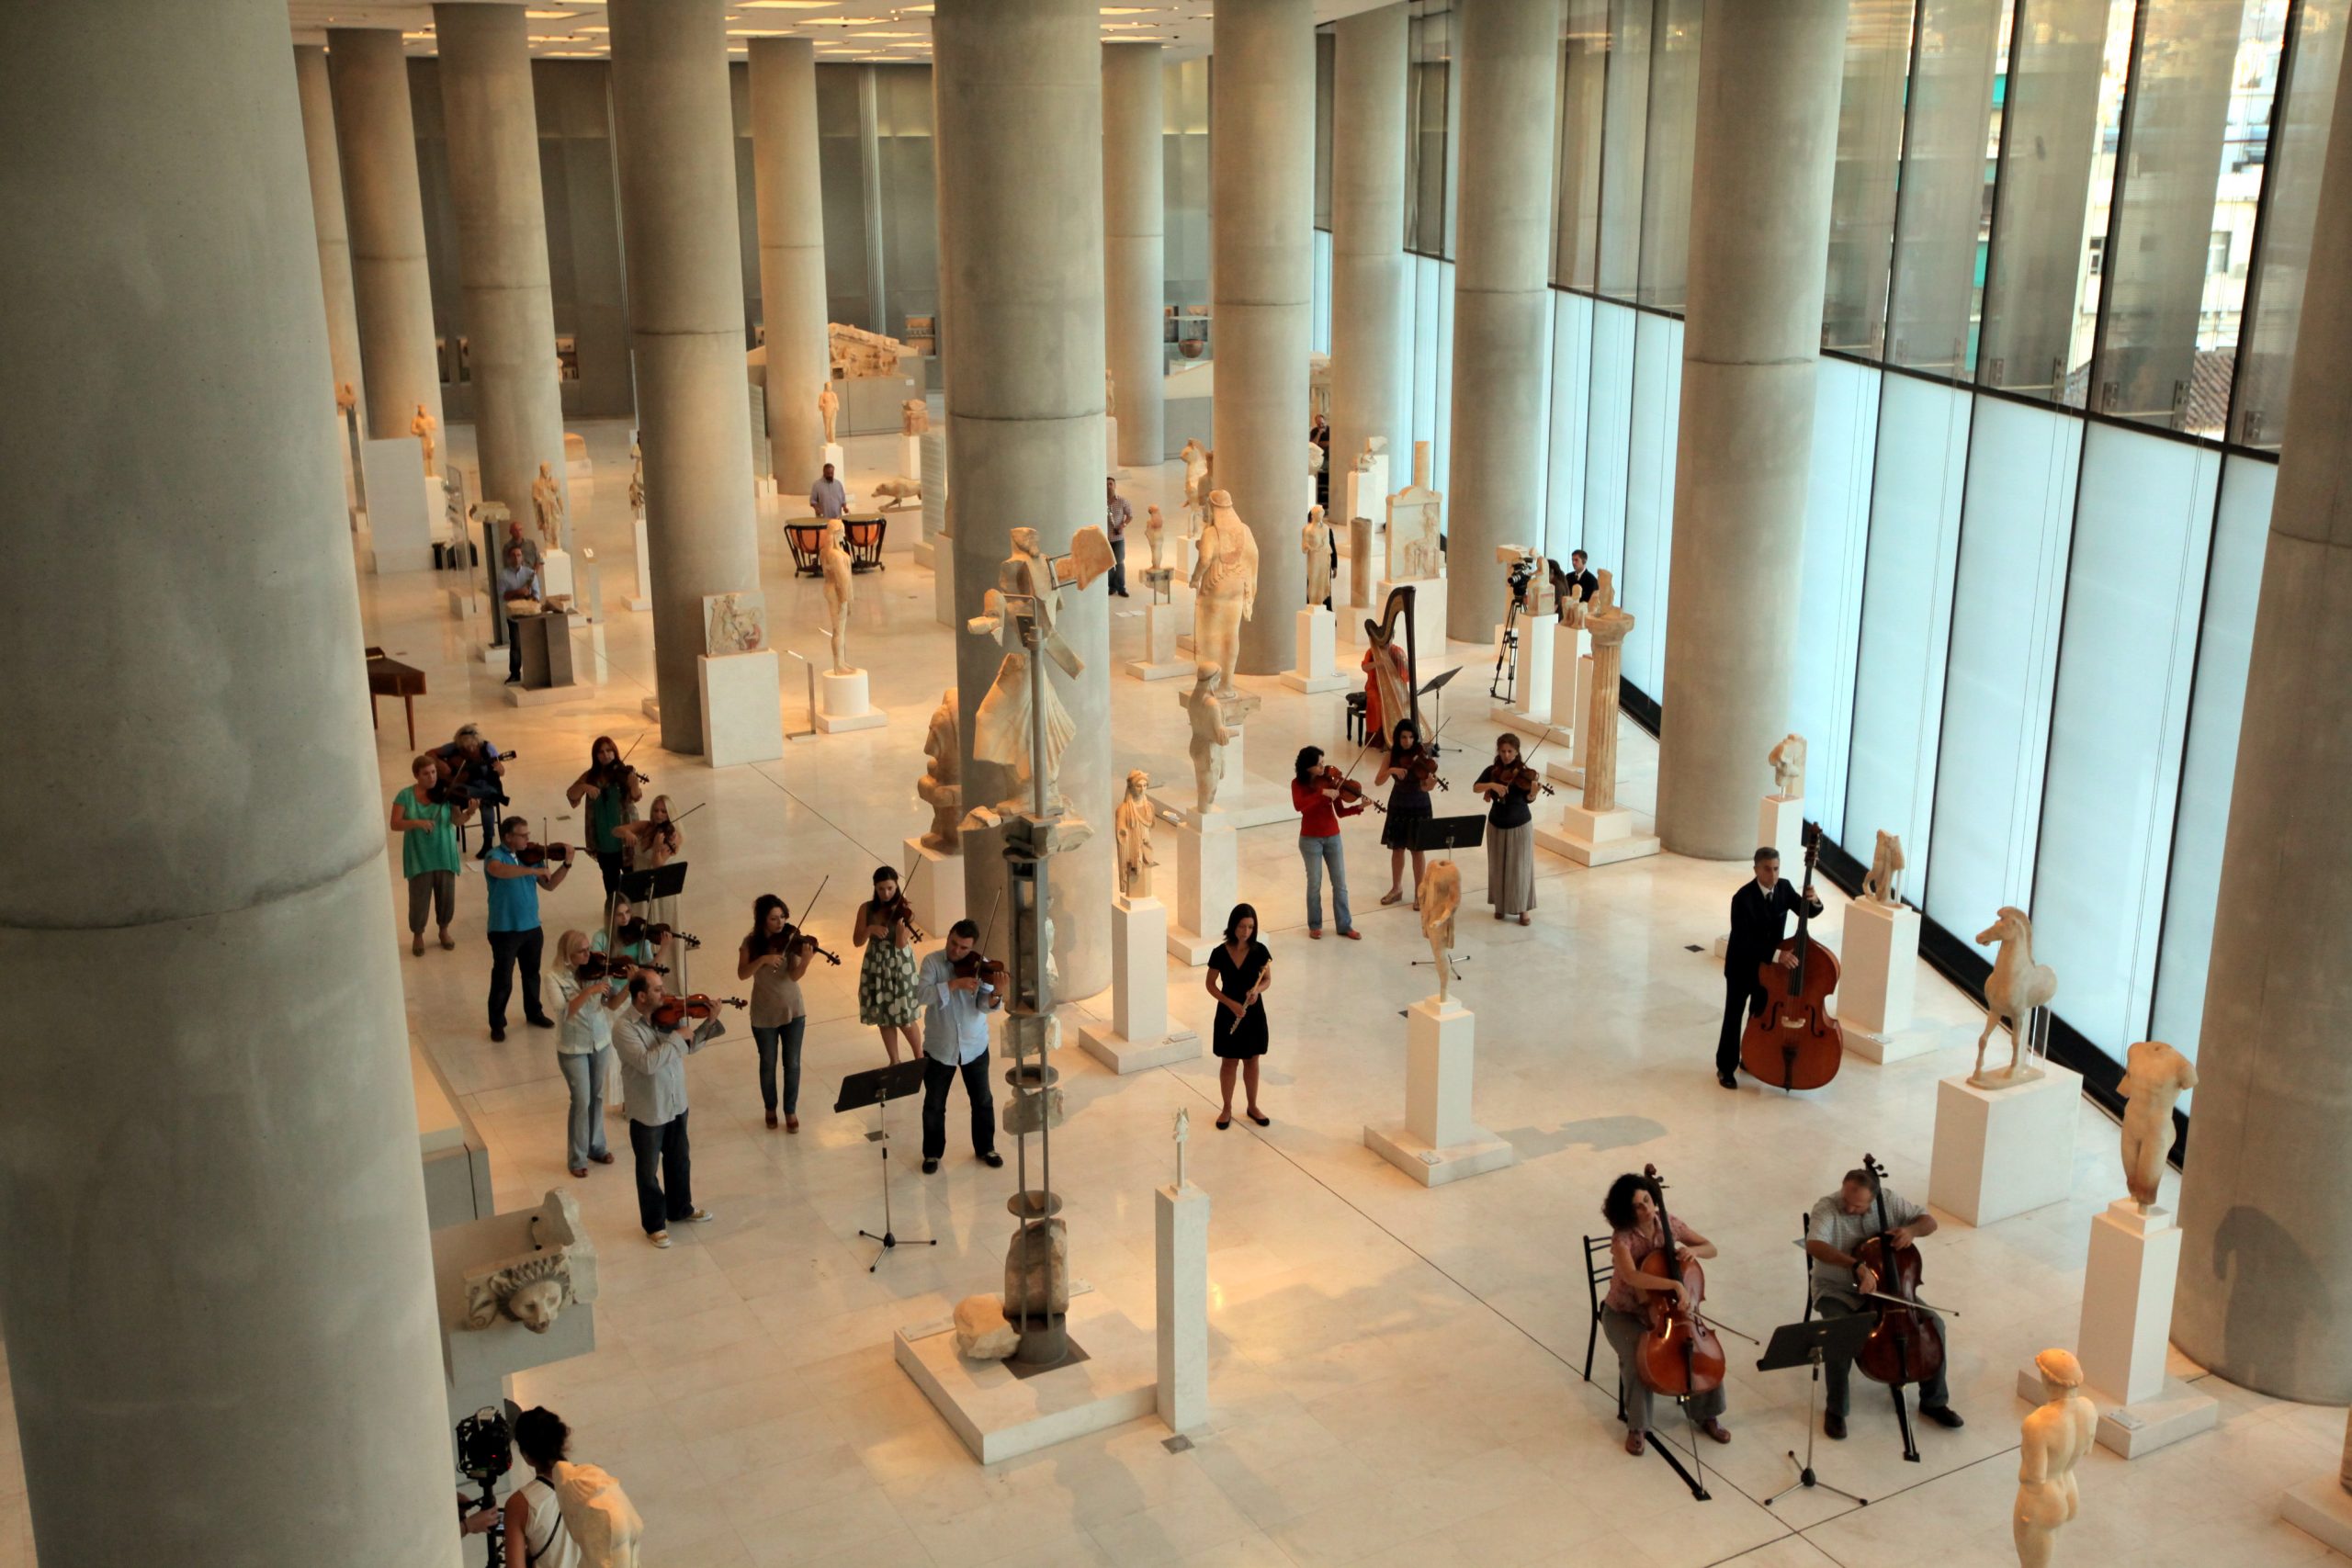 ELSTAT – Reduction by 87.5% to museum visitors in the first five months of 2021